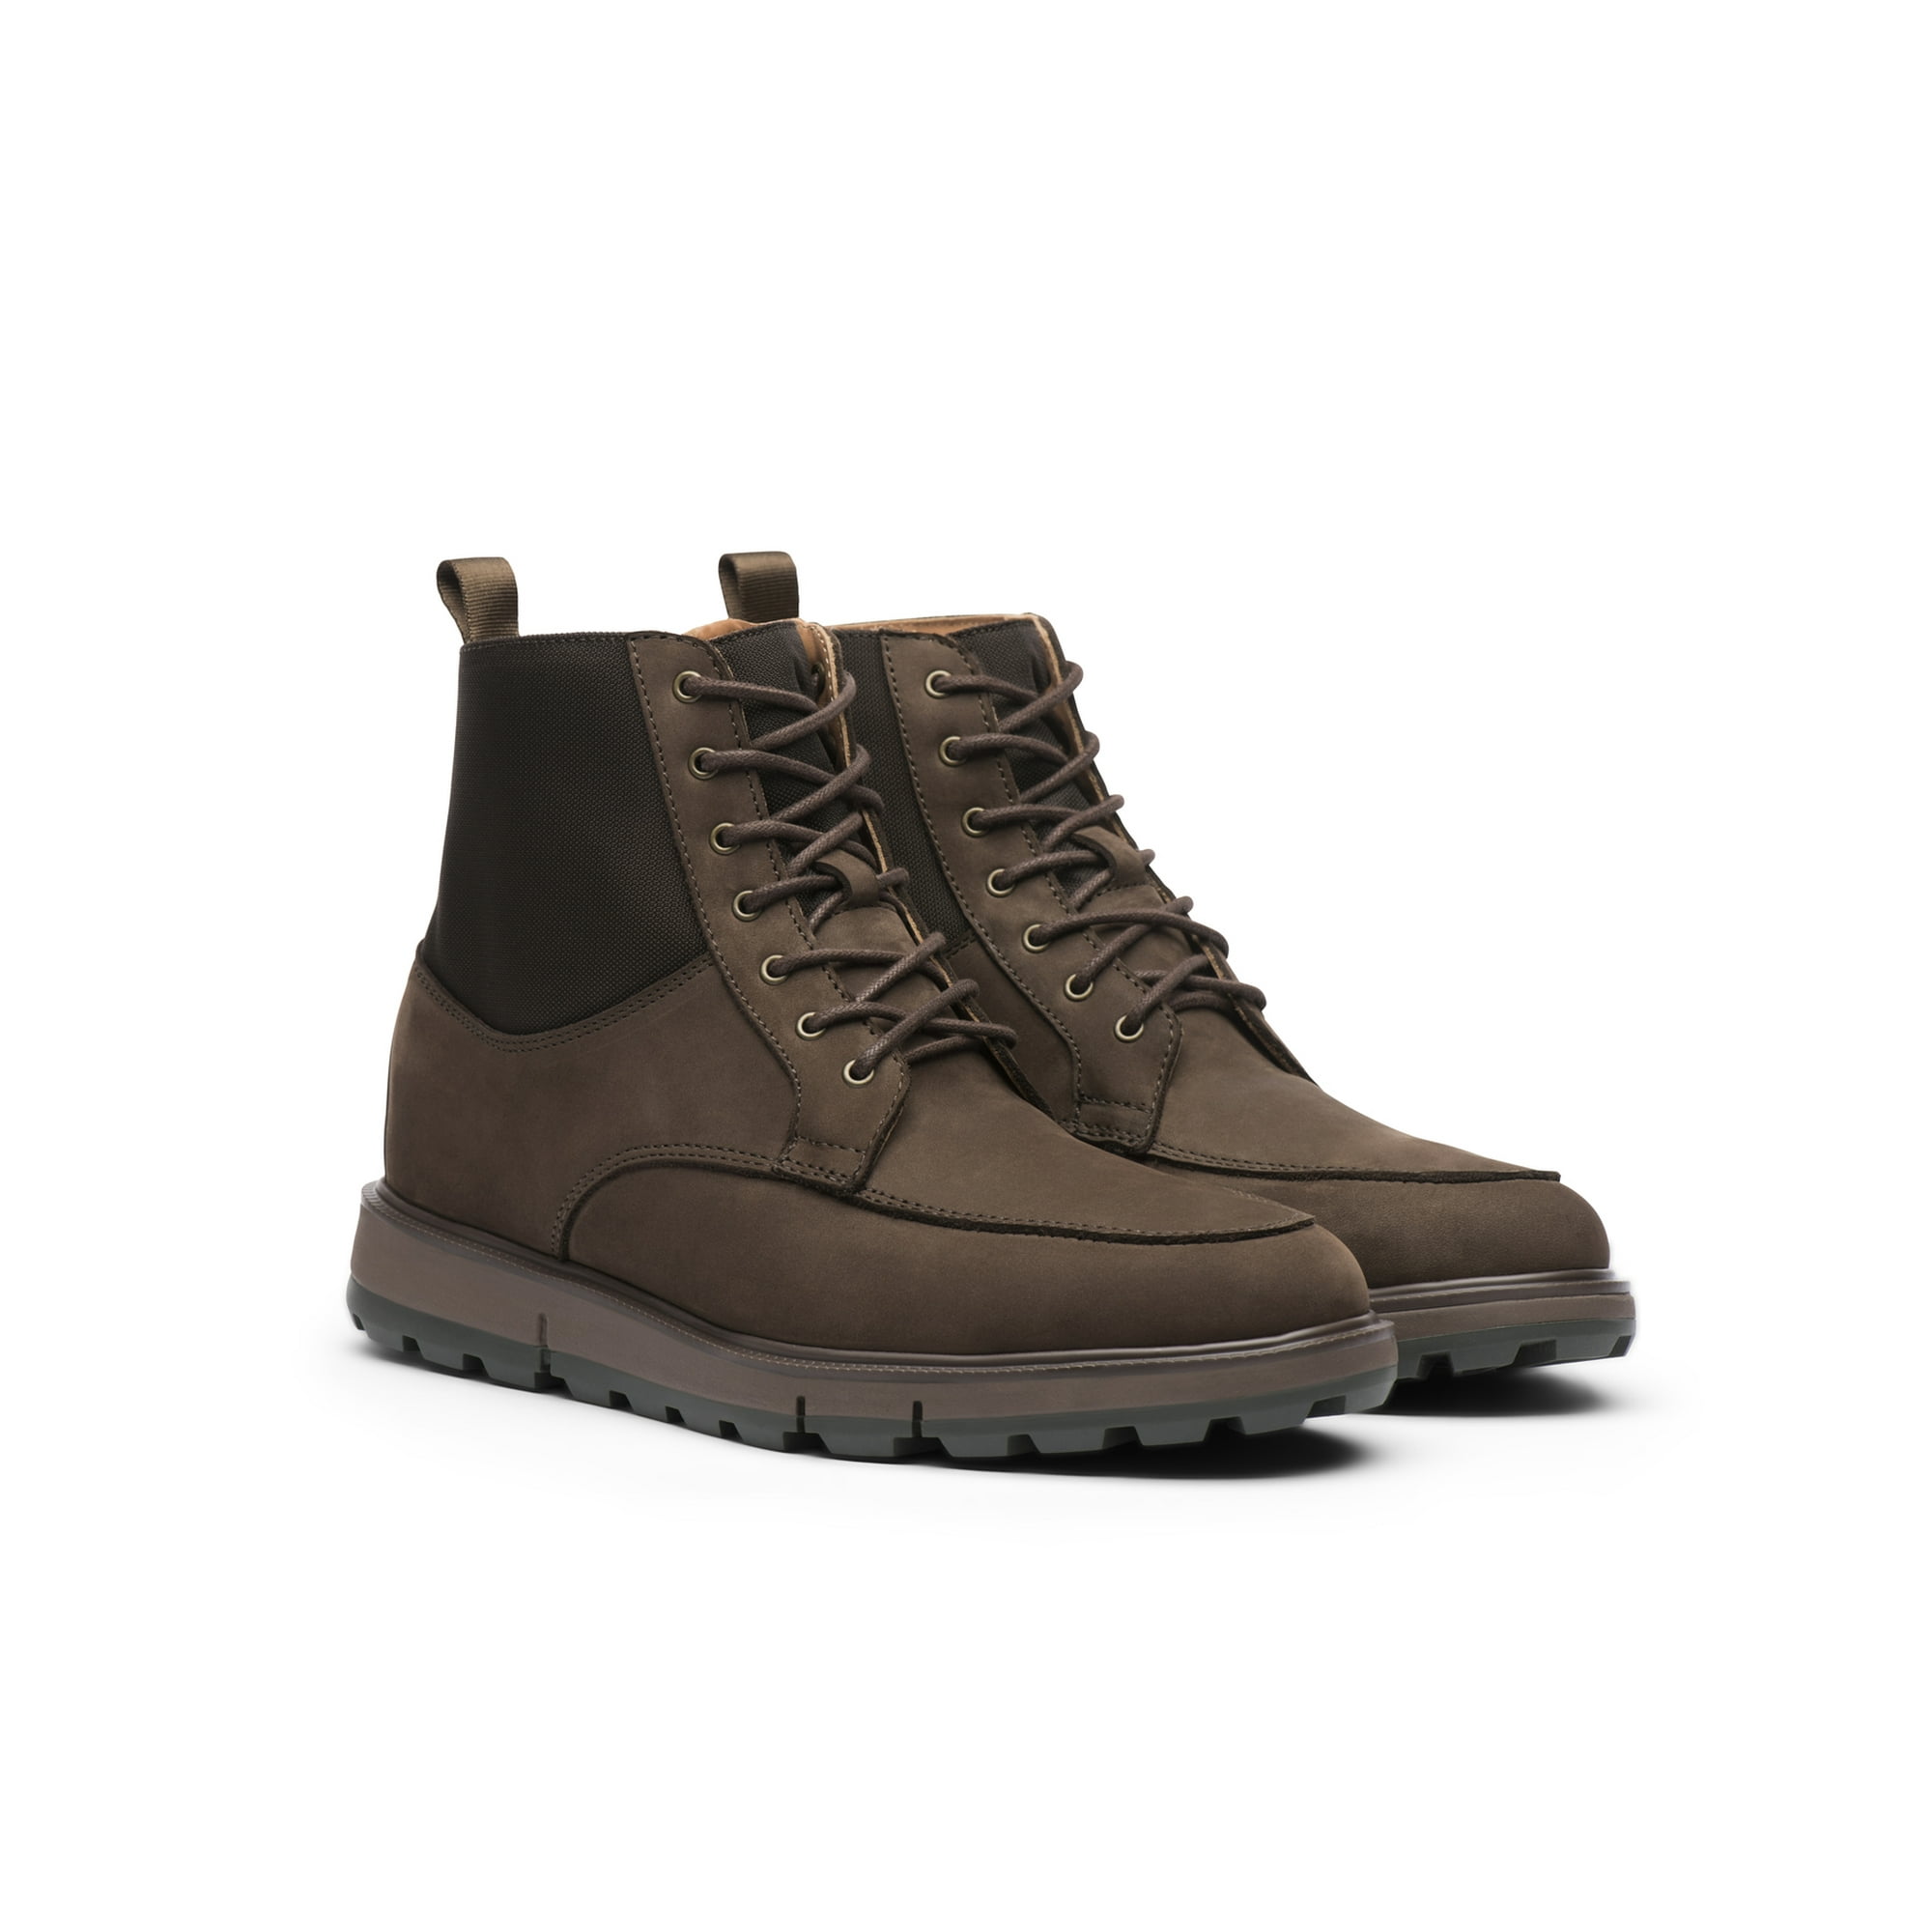 Swims Men's Motion Country Boot in Brown/Olive, 13 US | Walmart Canada